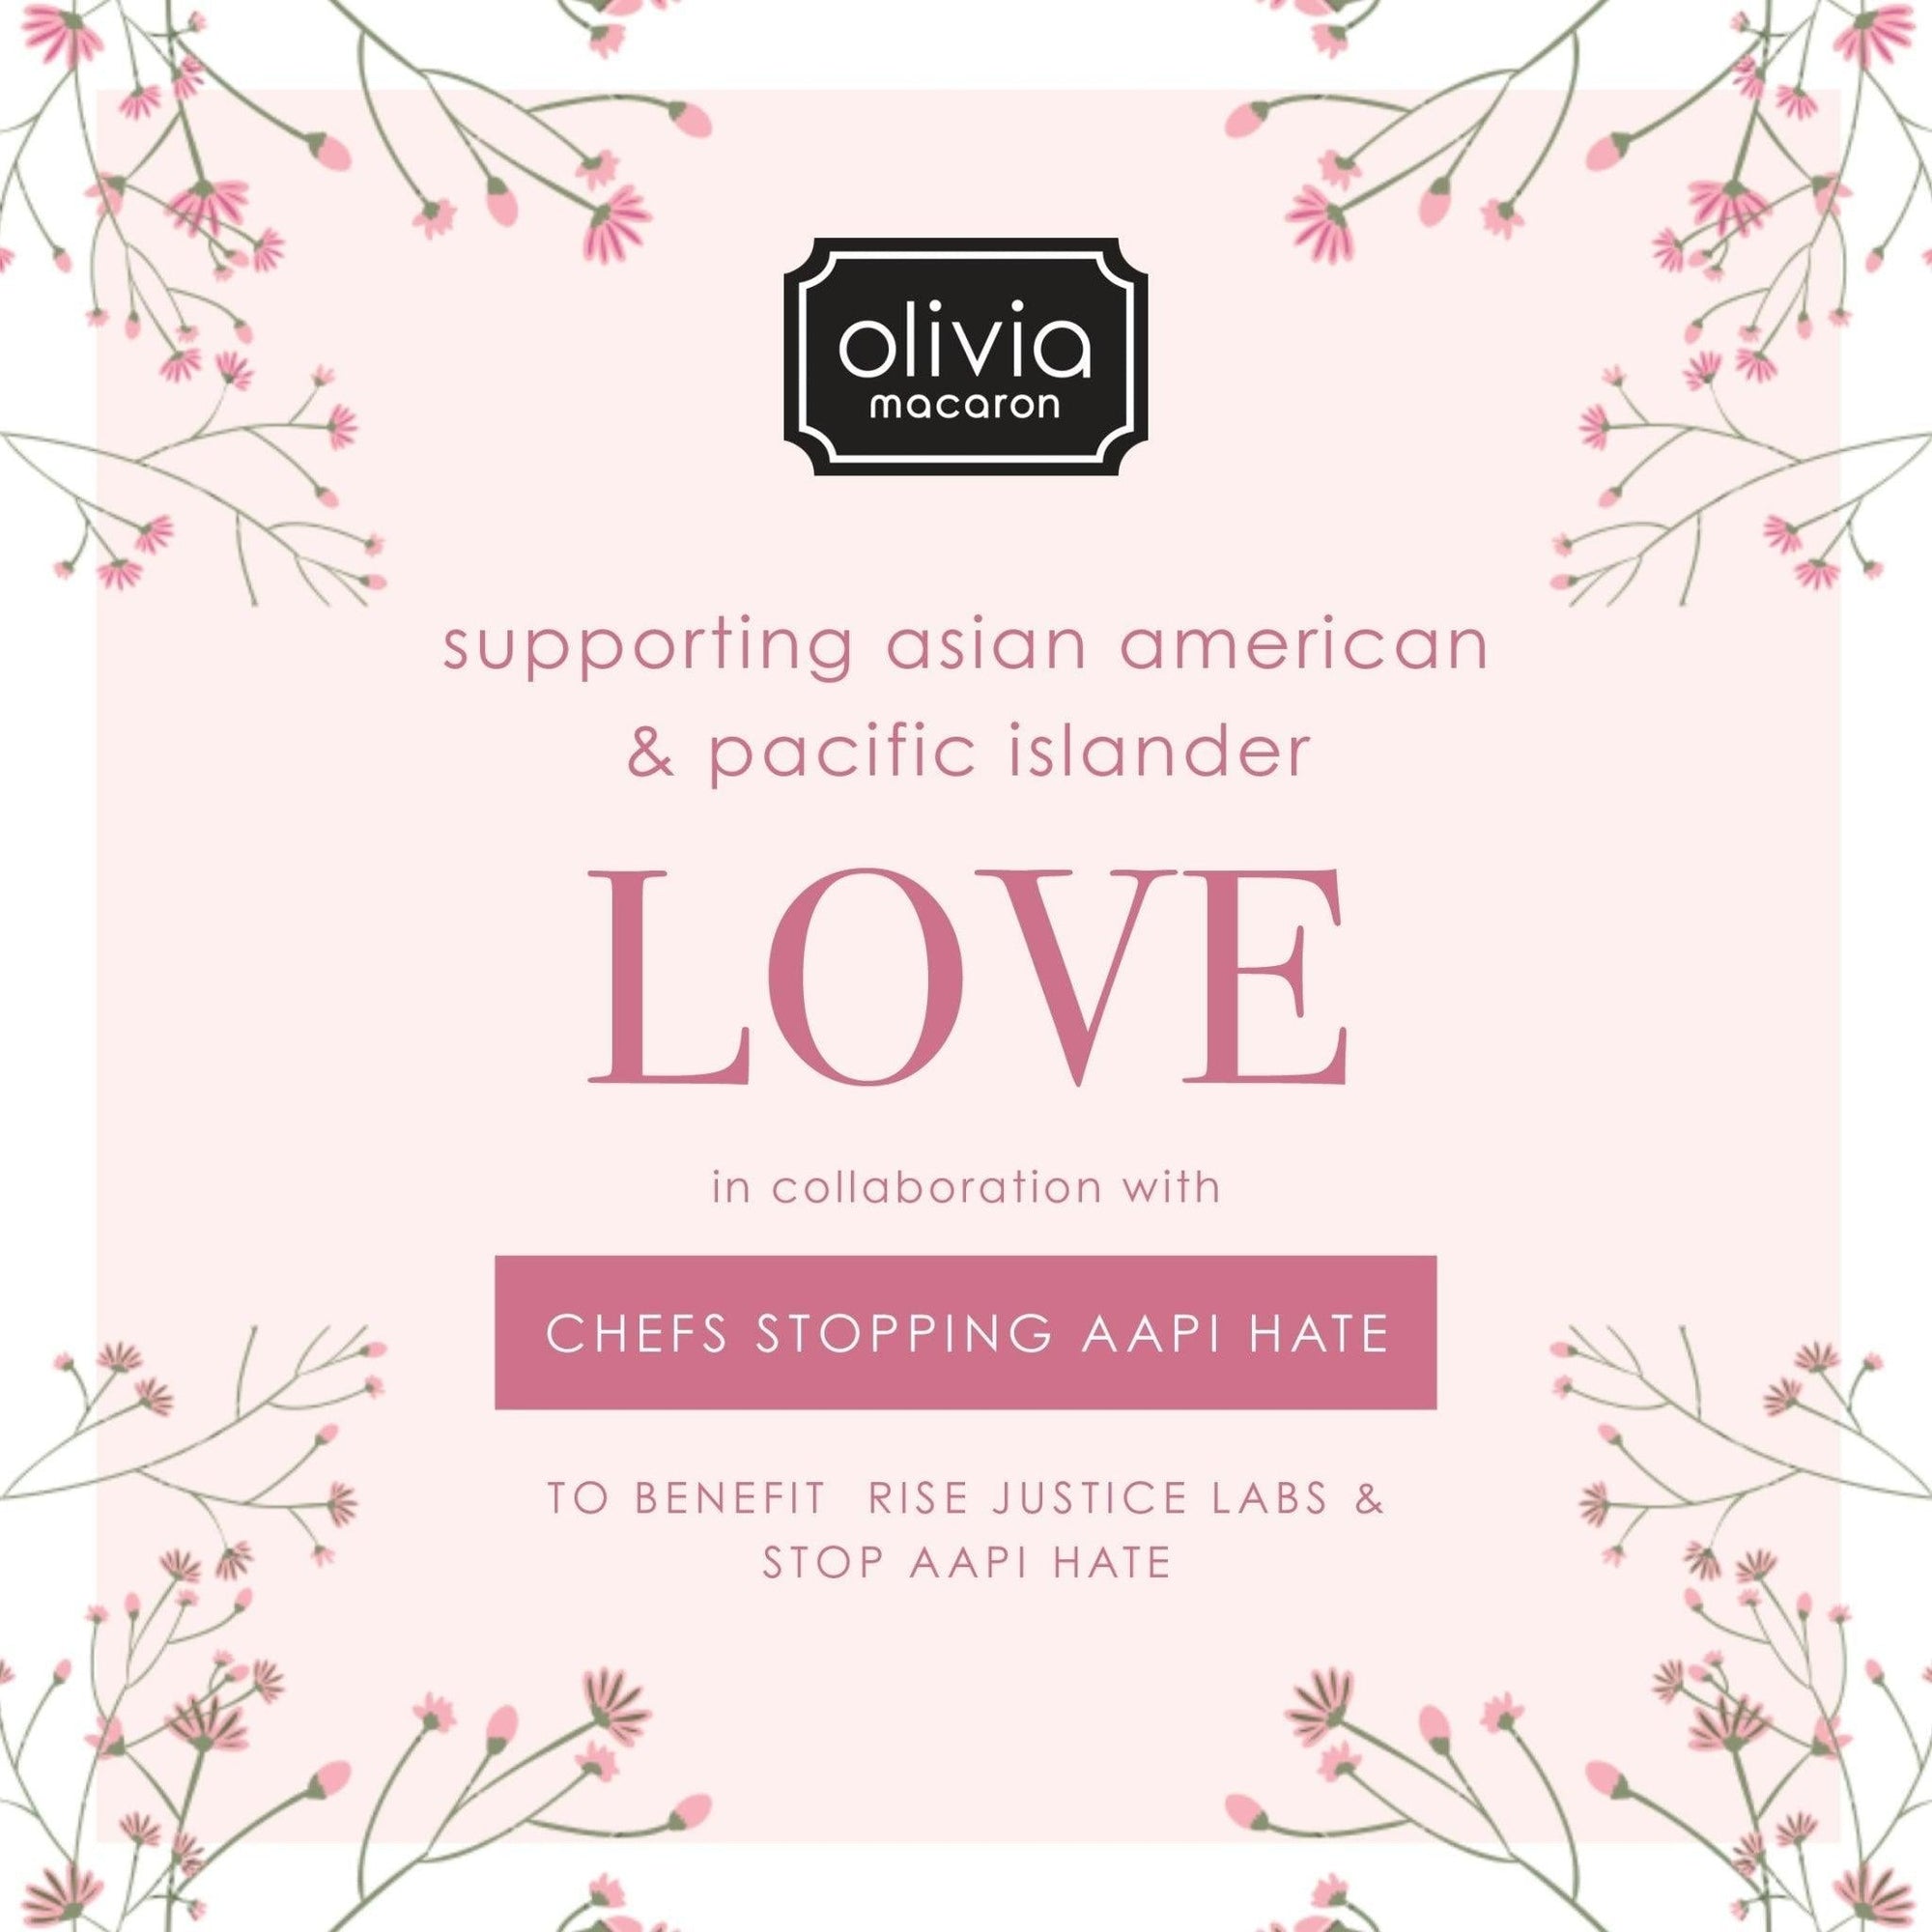 Spread Love This Month With Our Cherry Blossom Gift Box - Olivia Macaron